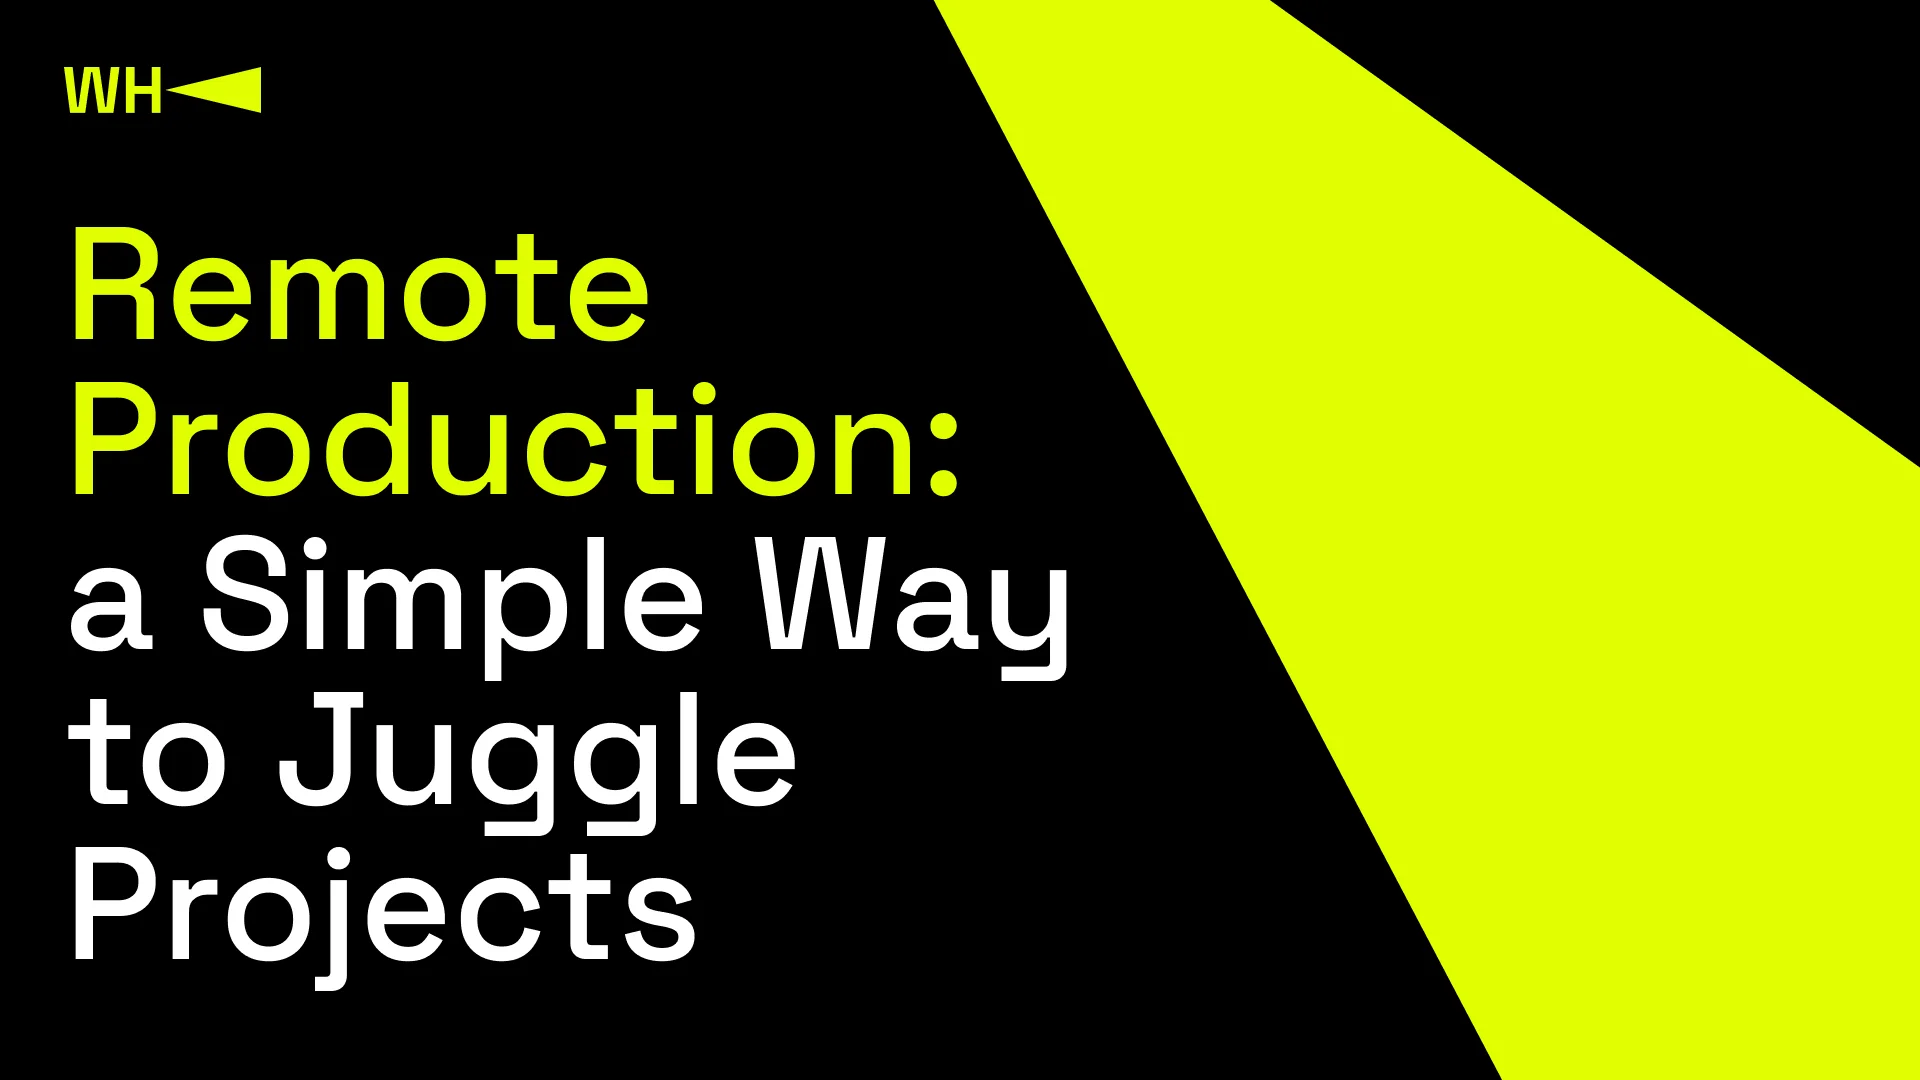 Remote Production: a Simple Way to Juggle Projects